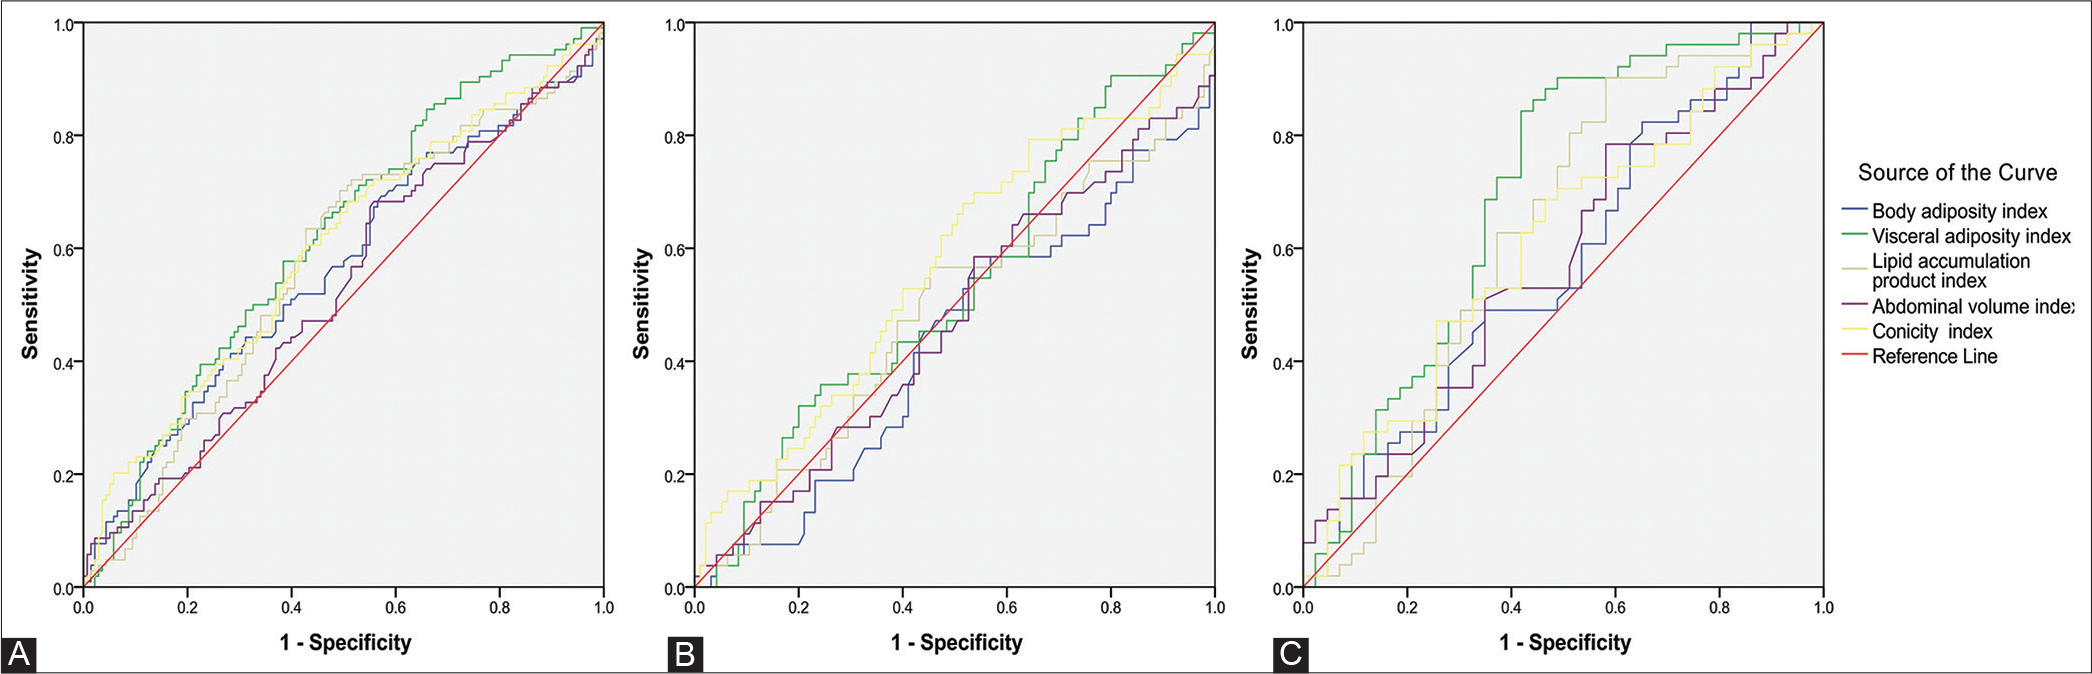 Predictive value of adiposity index in identifying depression in individuals with type 2 diabetes mellitus in Indian population